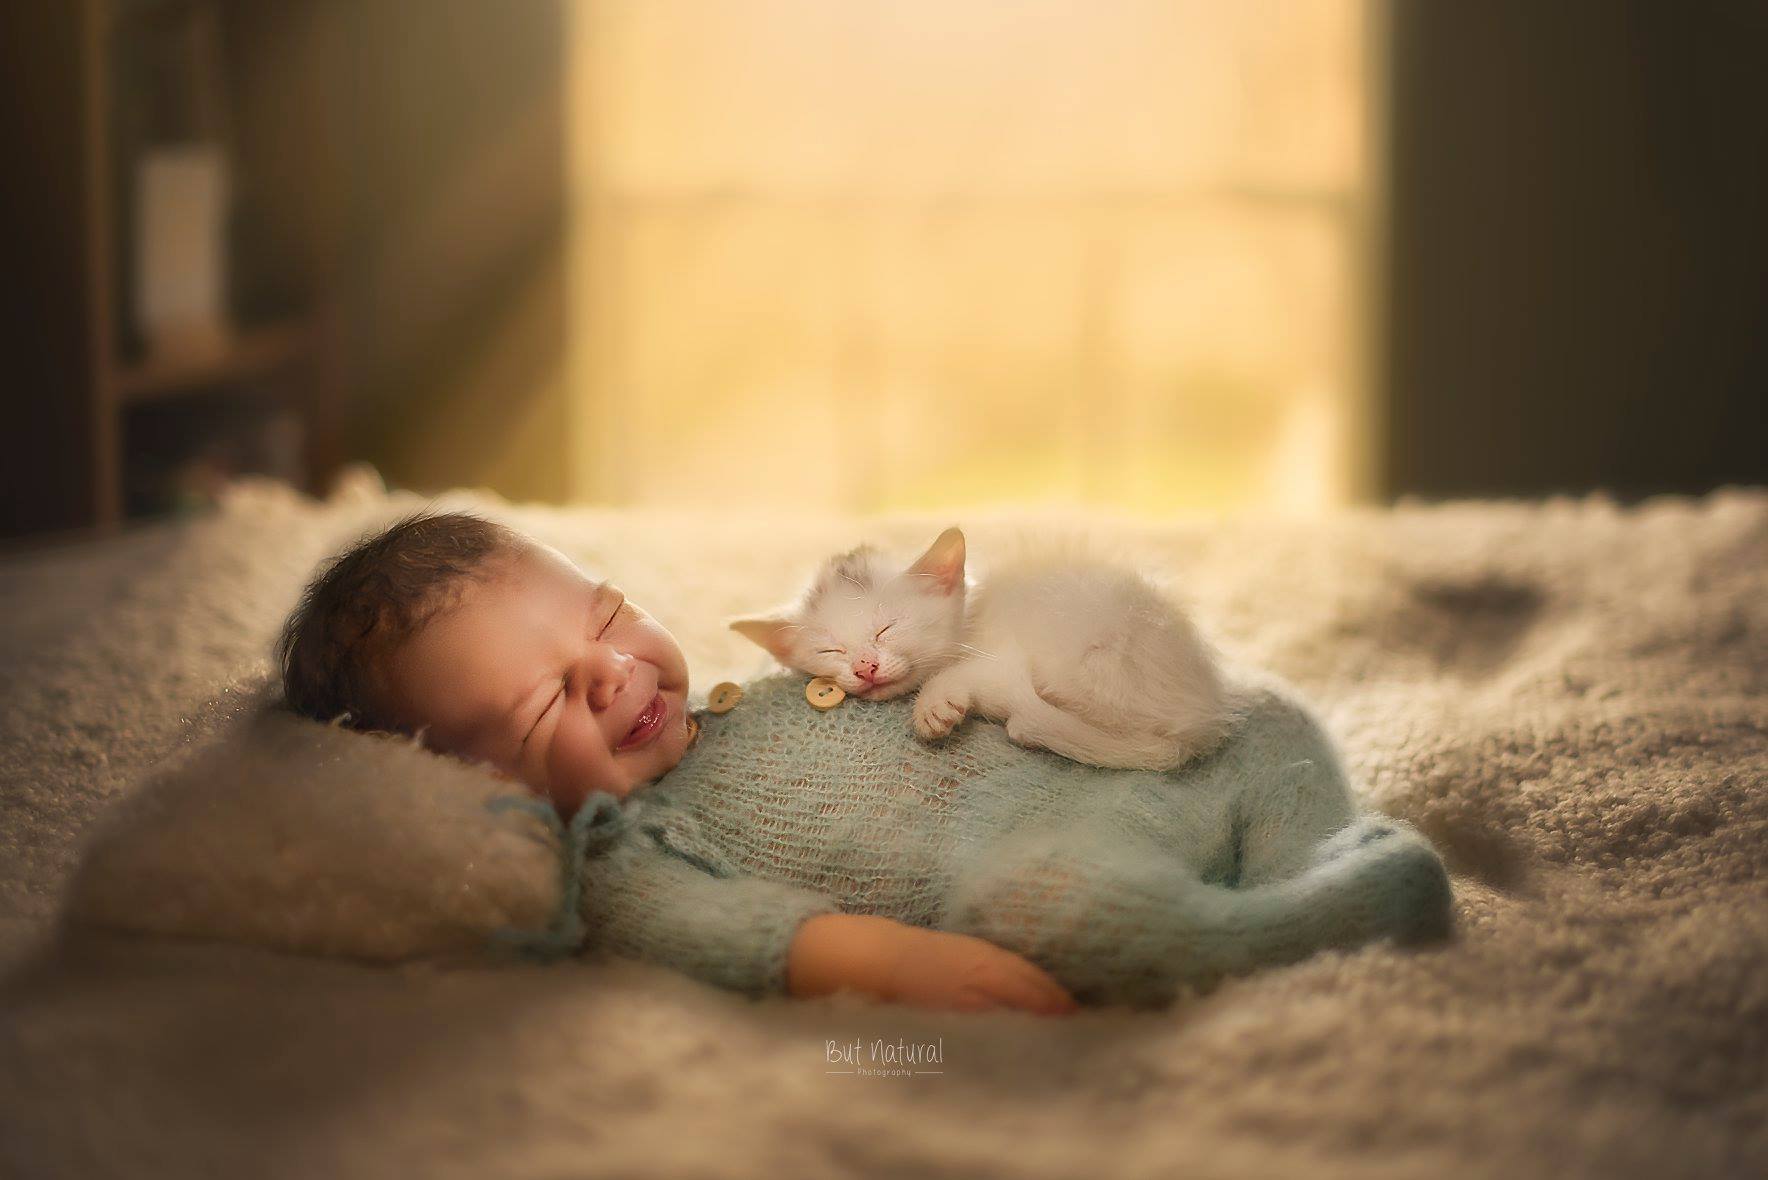 a baby sleeping with a kitten on its back